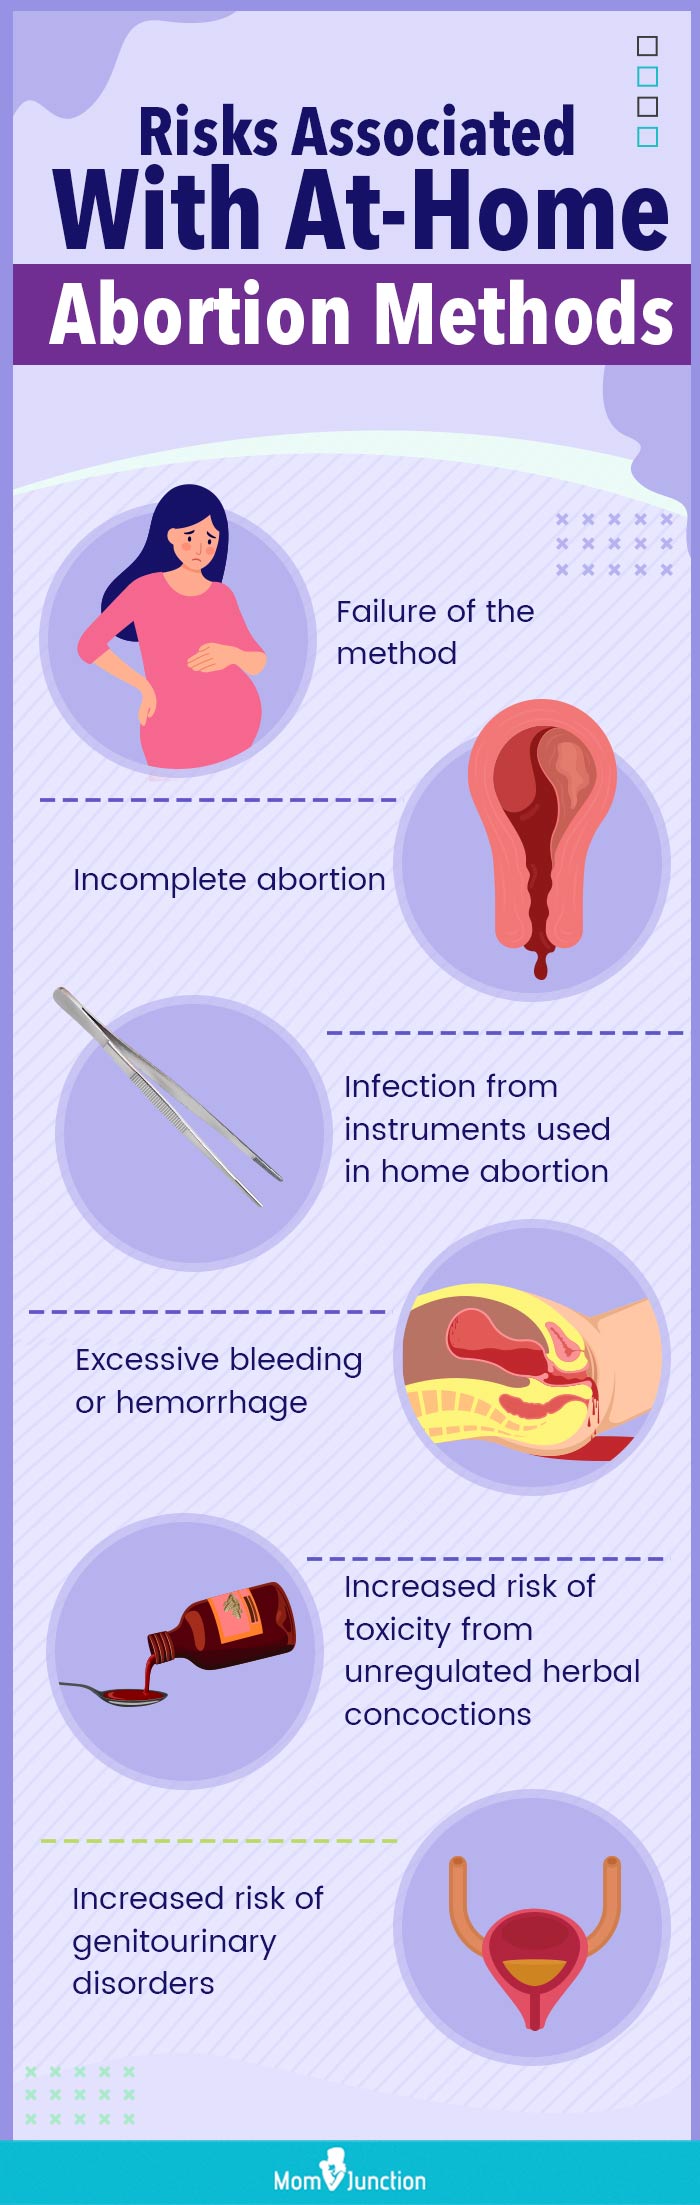 risks associated with at home abortion methods (infographic)